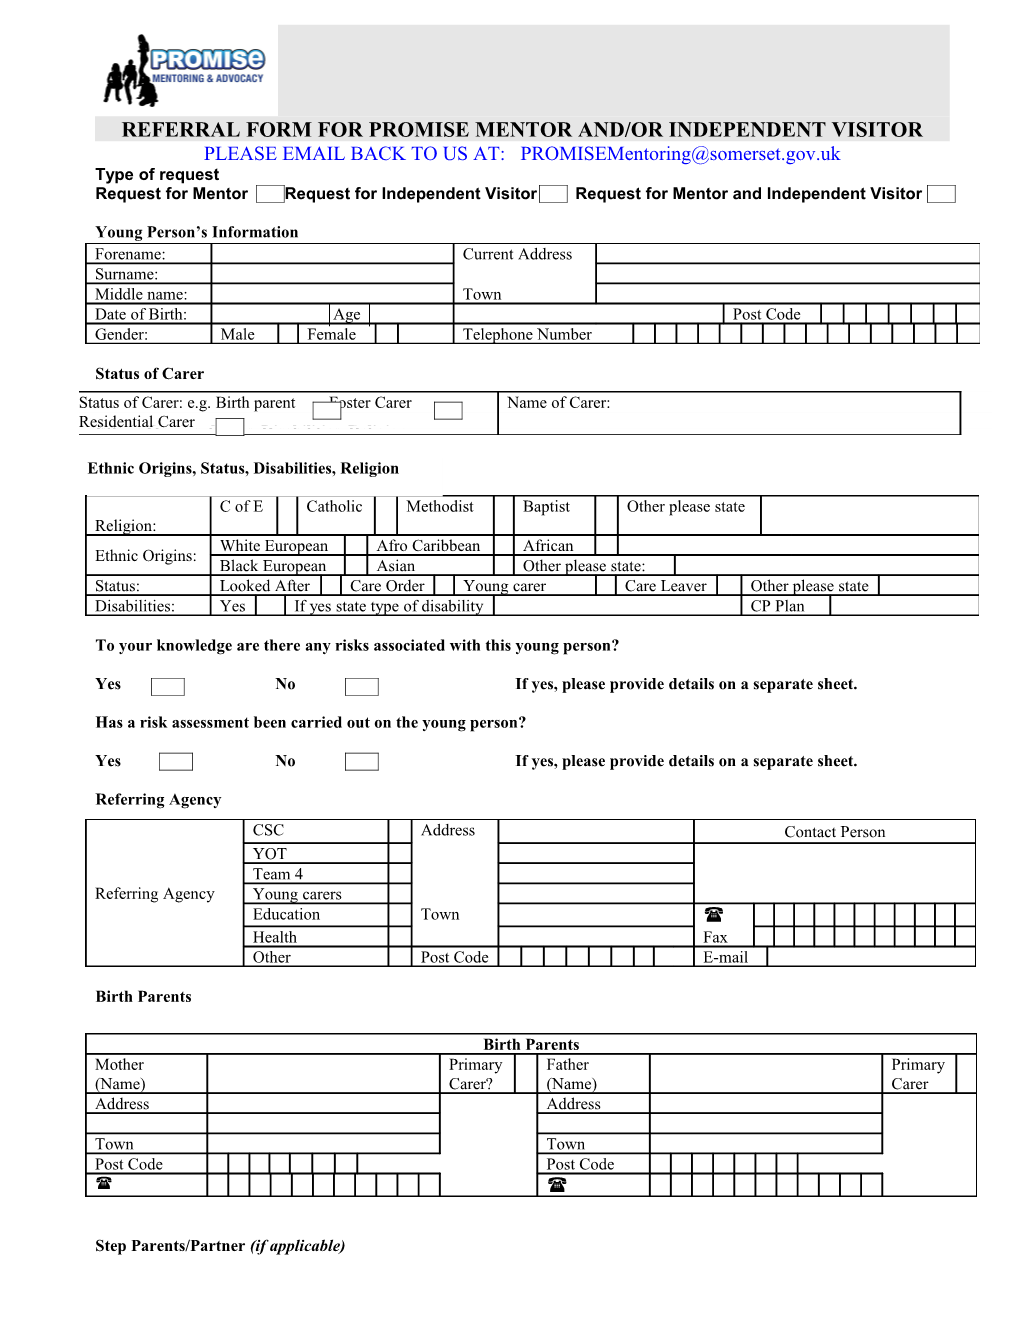 Referral Form for Promise Mentor And/Or Independent Visitor